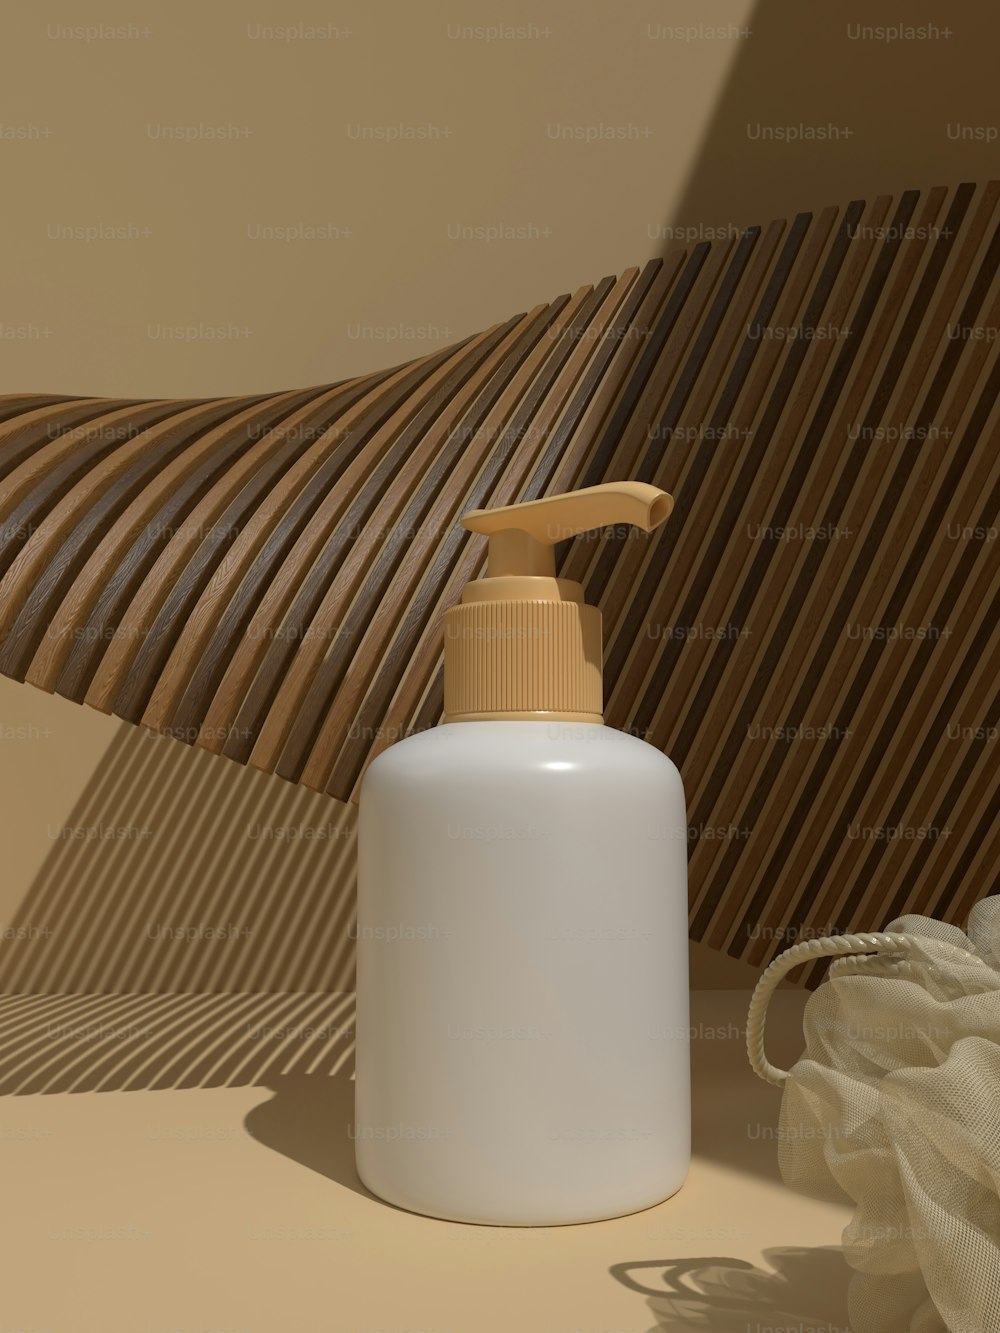 a bottle of lotion sitting next to a cloth